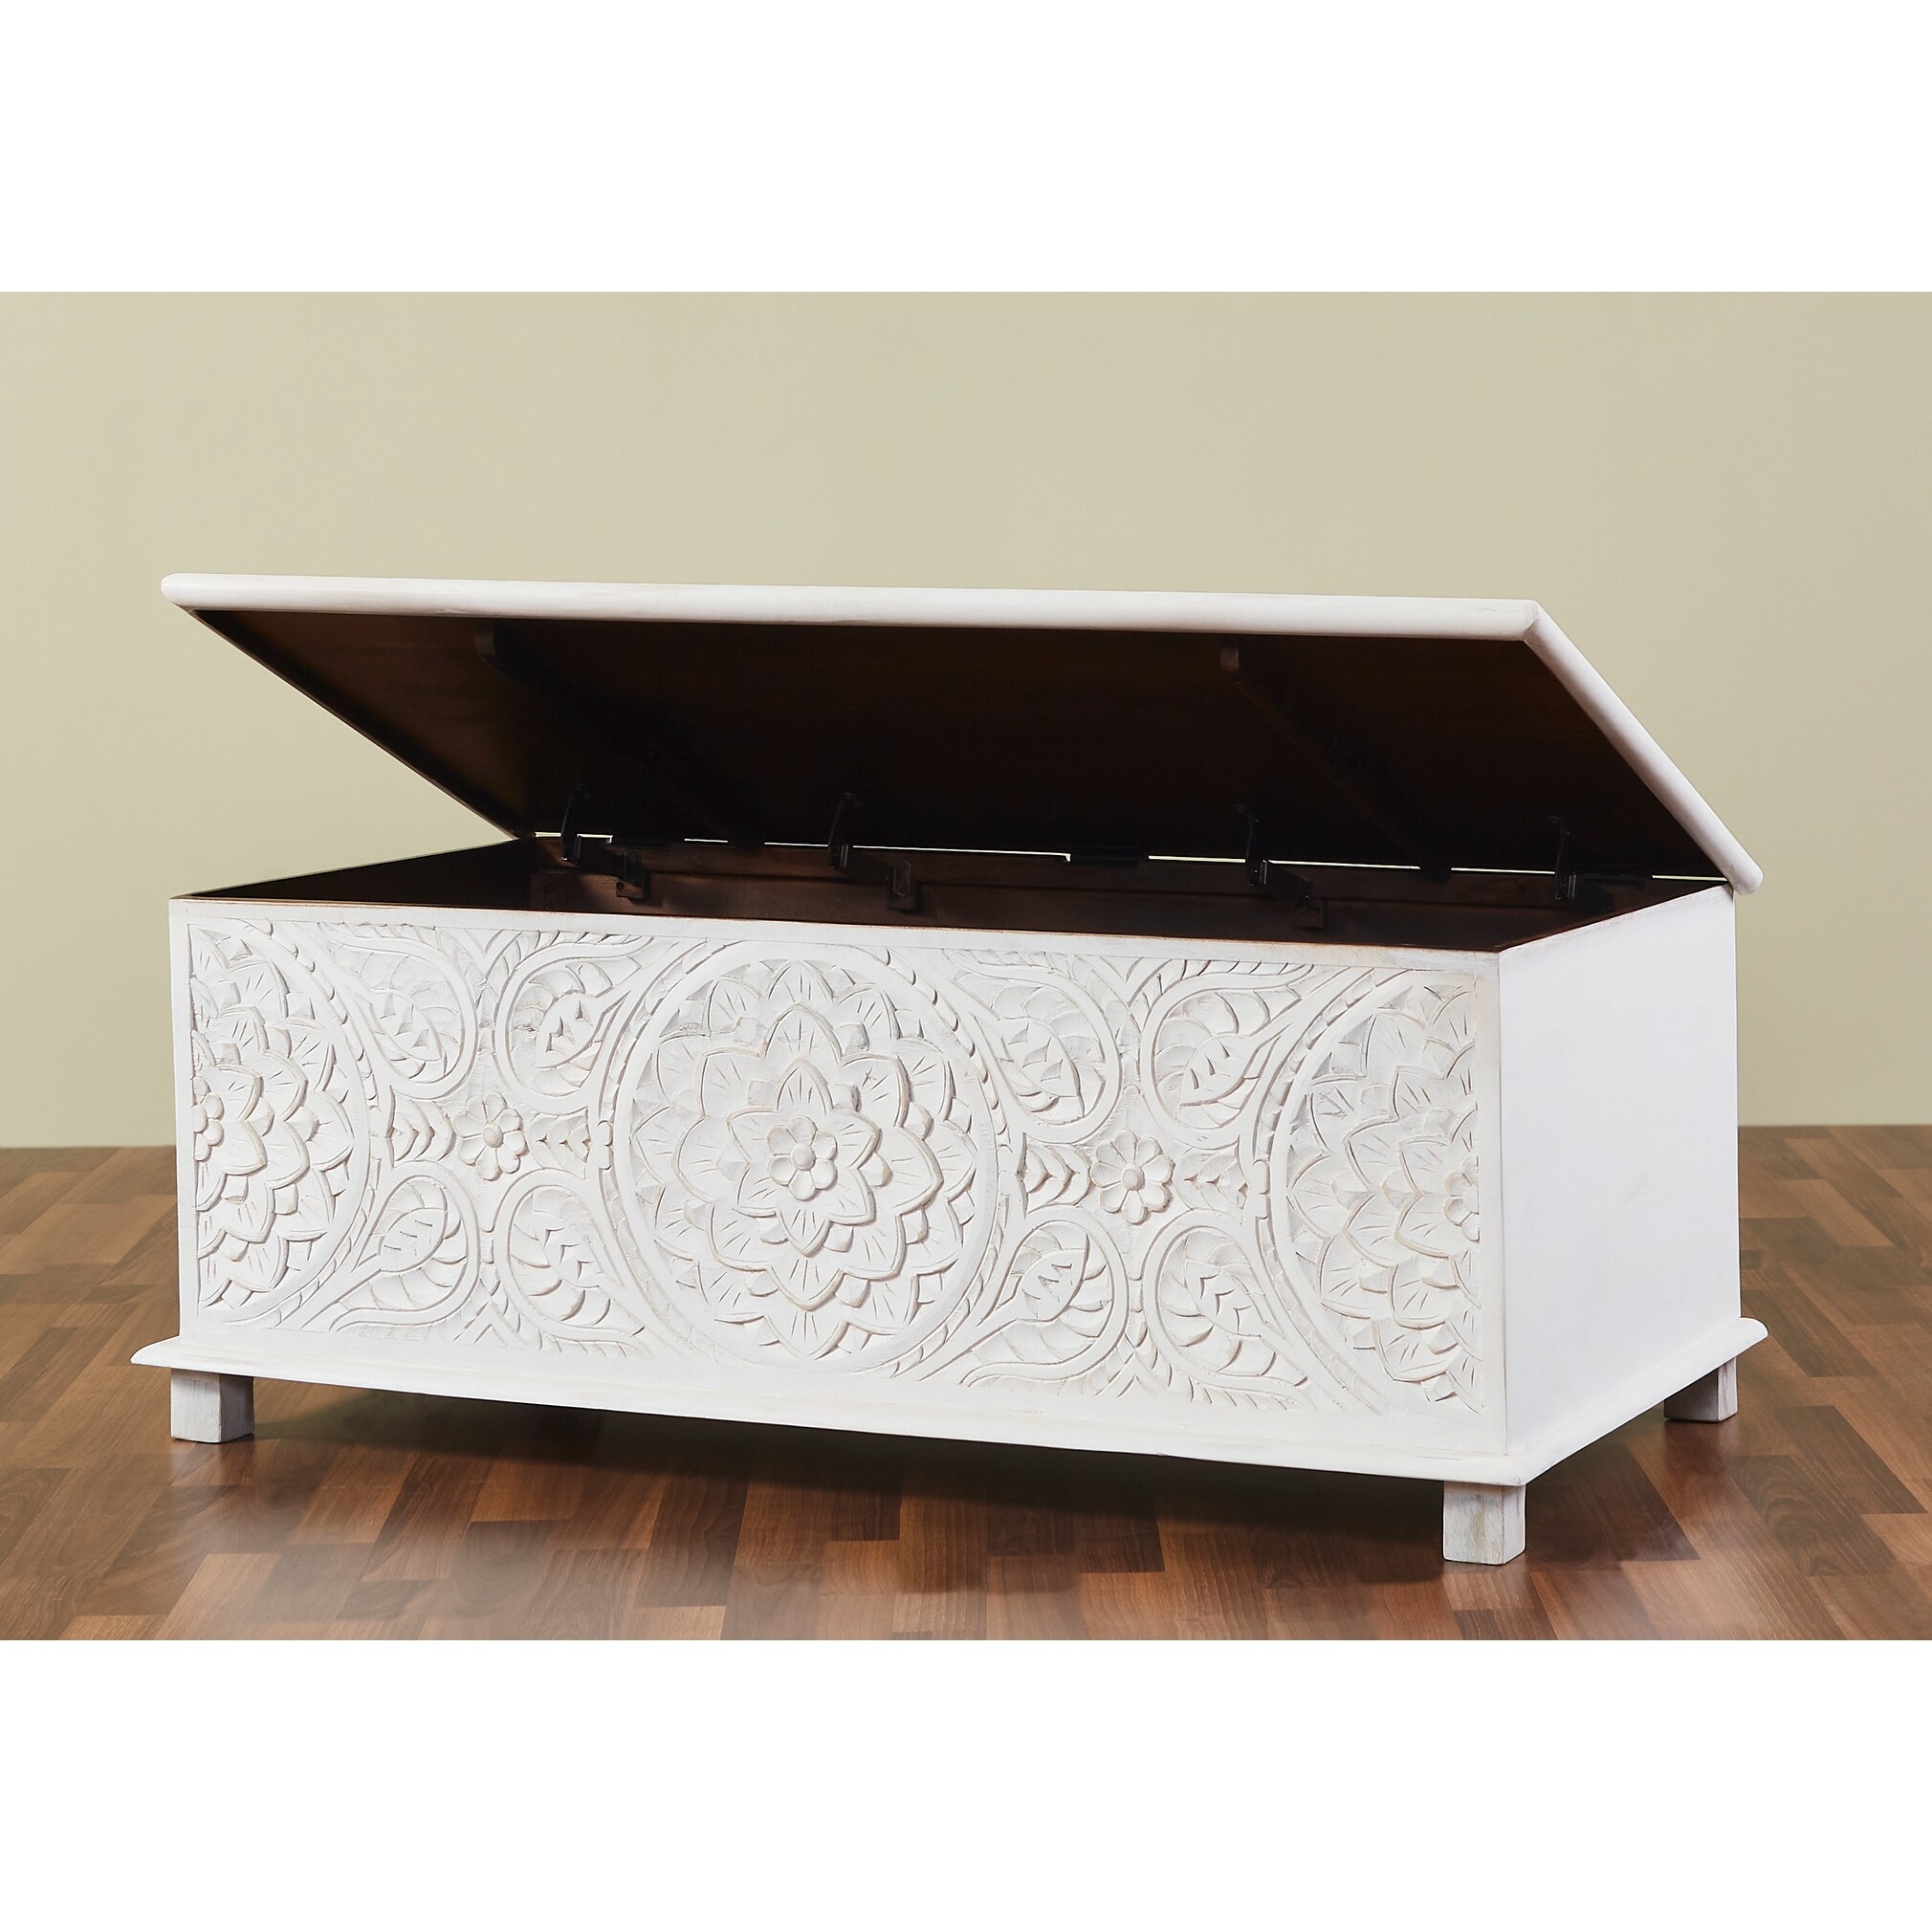 The Curated 17th Century Trunk Solid wood hand-carved 48" Coffee Table - 48 x 24 x 17 (H)